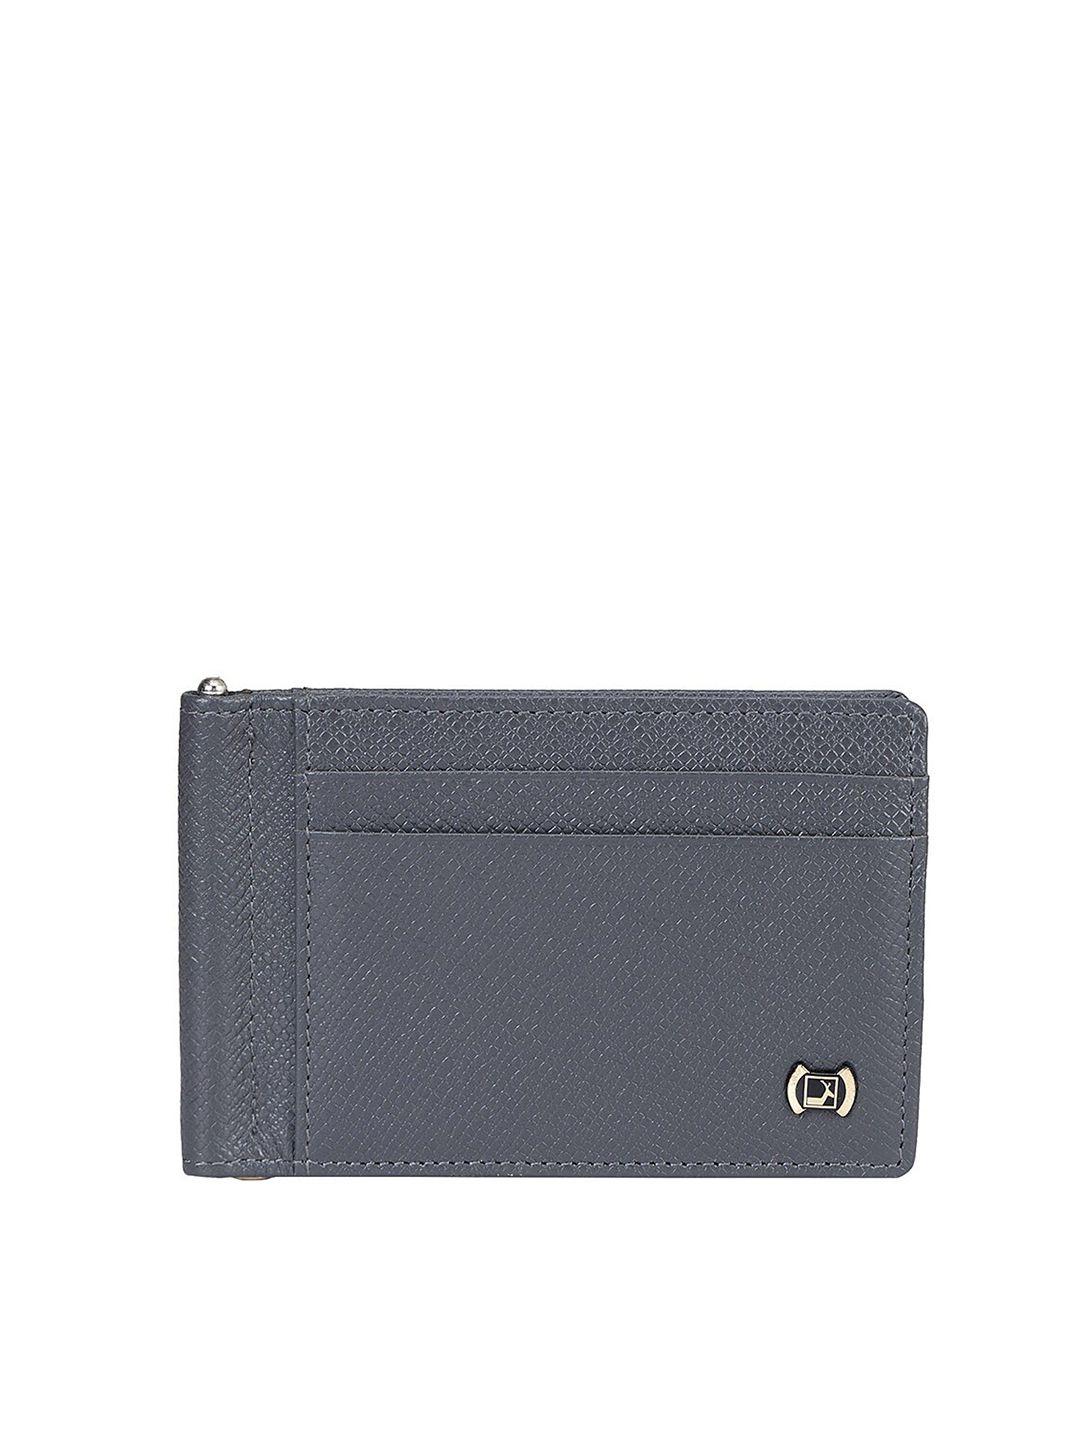 da milano leather non detachable flap two fold wallet with sd card holder